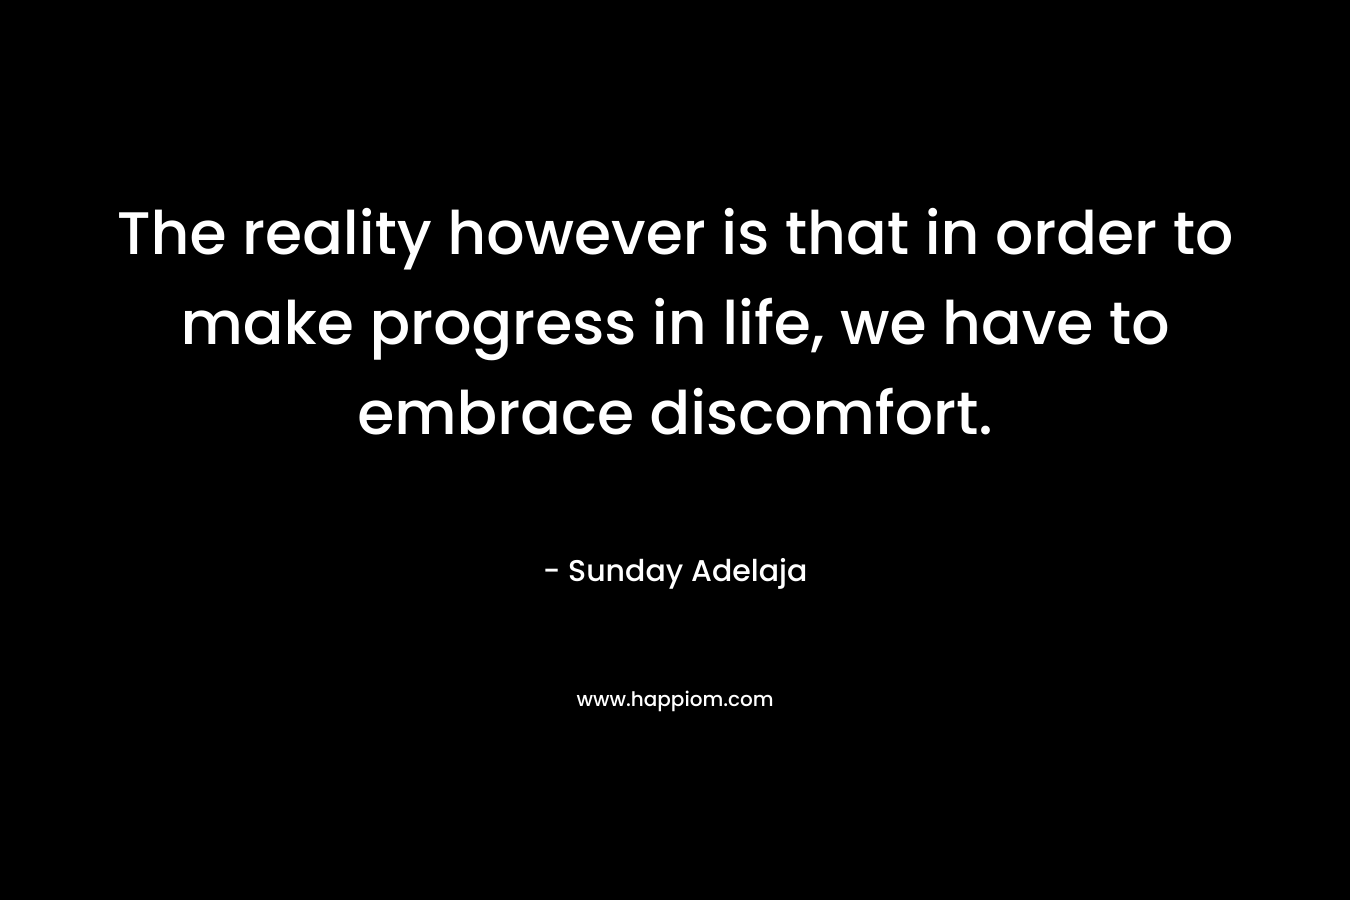 The reality however is that in order to make progress in life, we have to embrace discomfort.